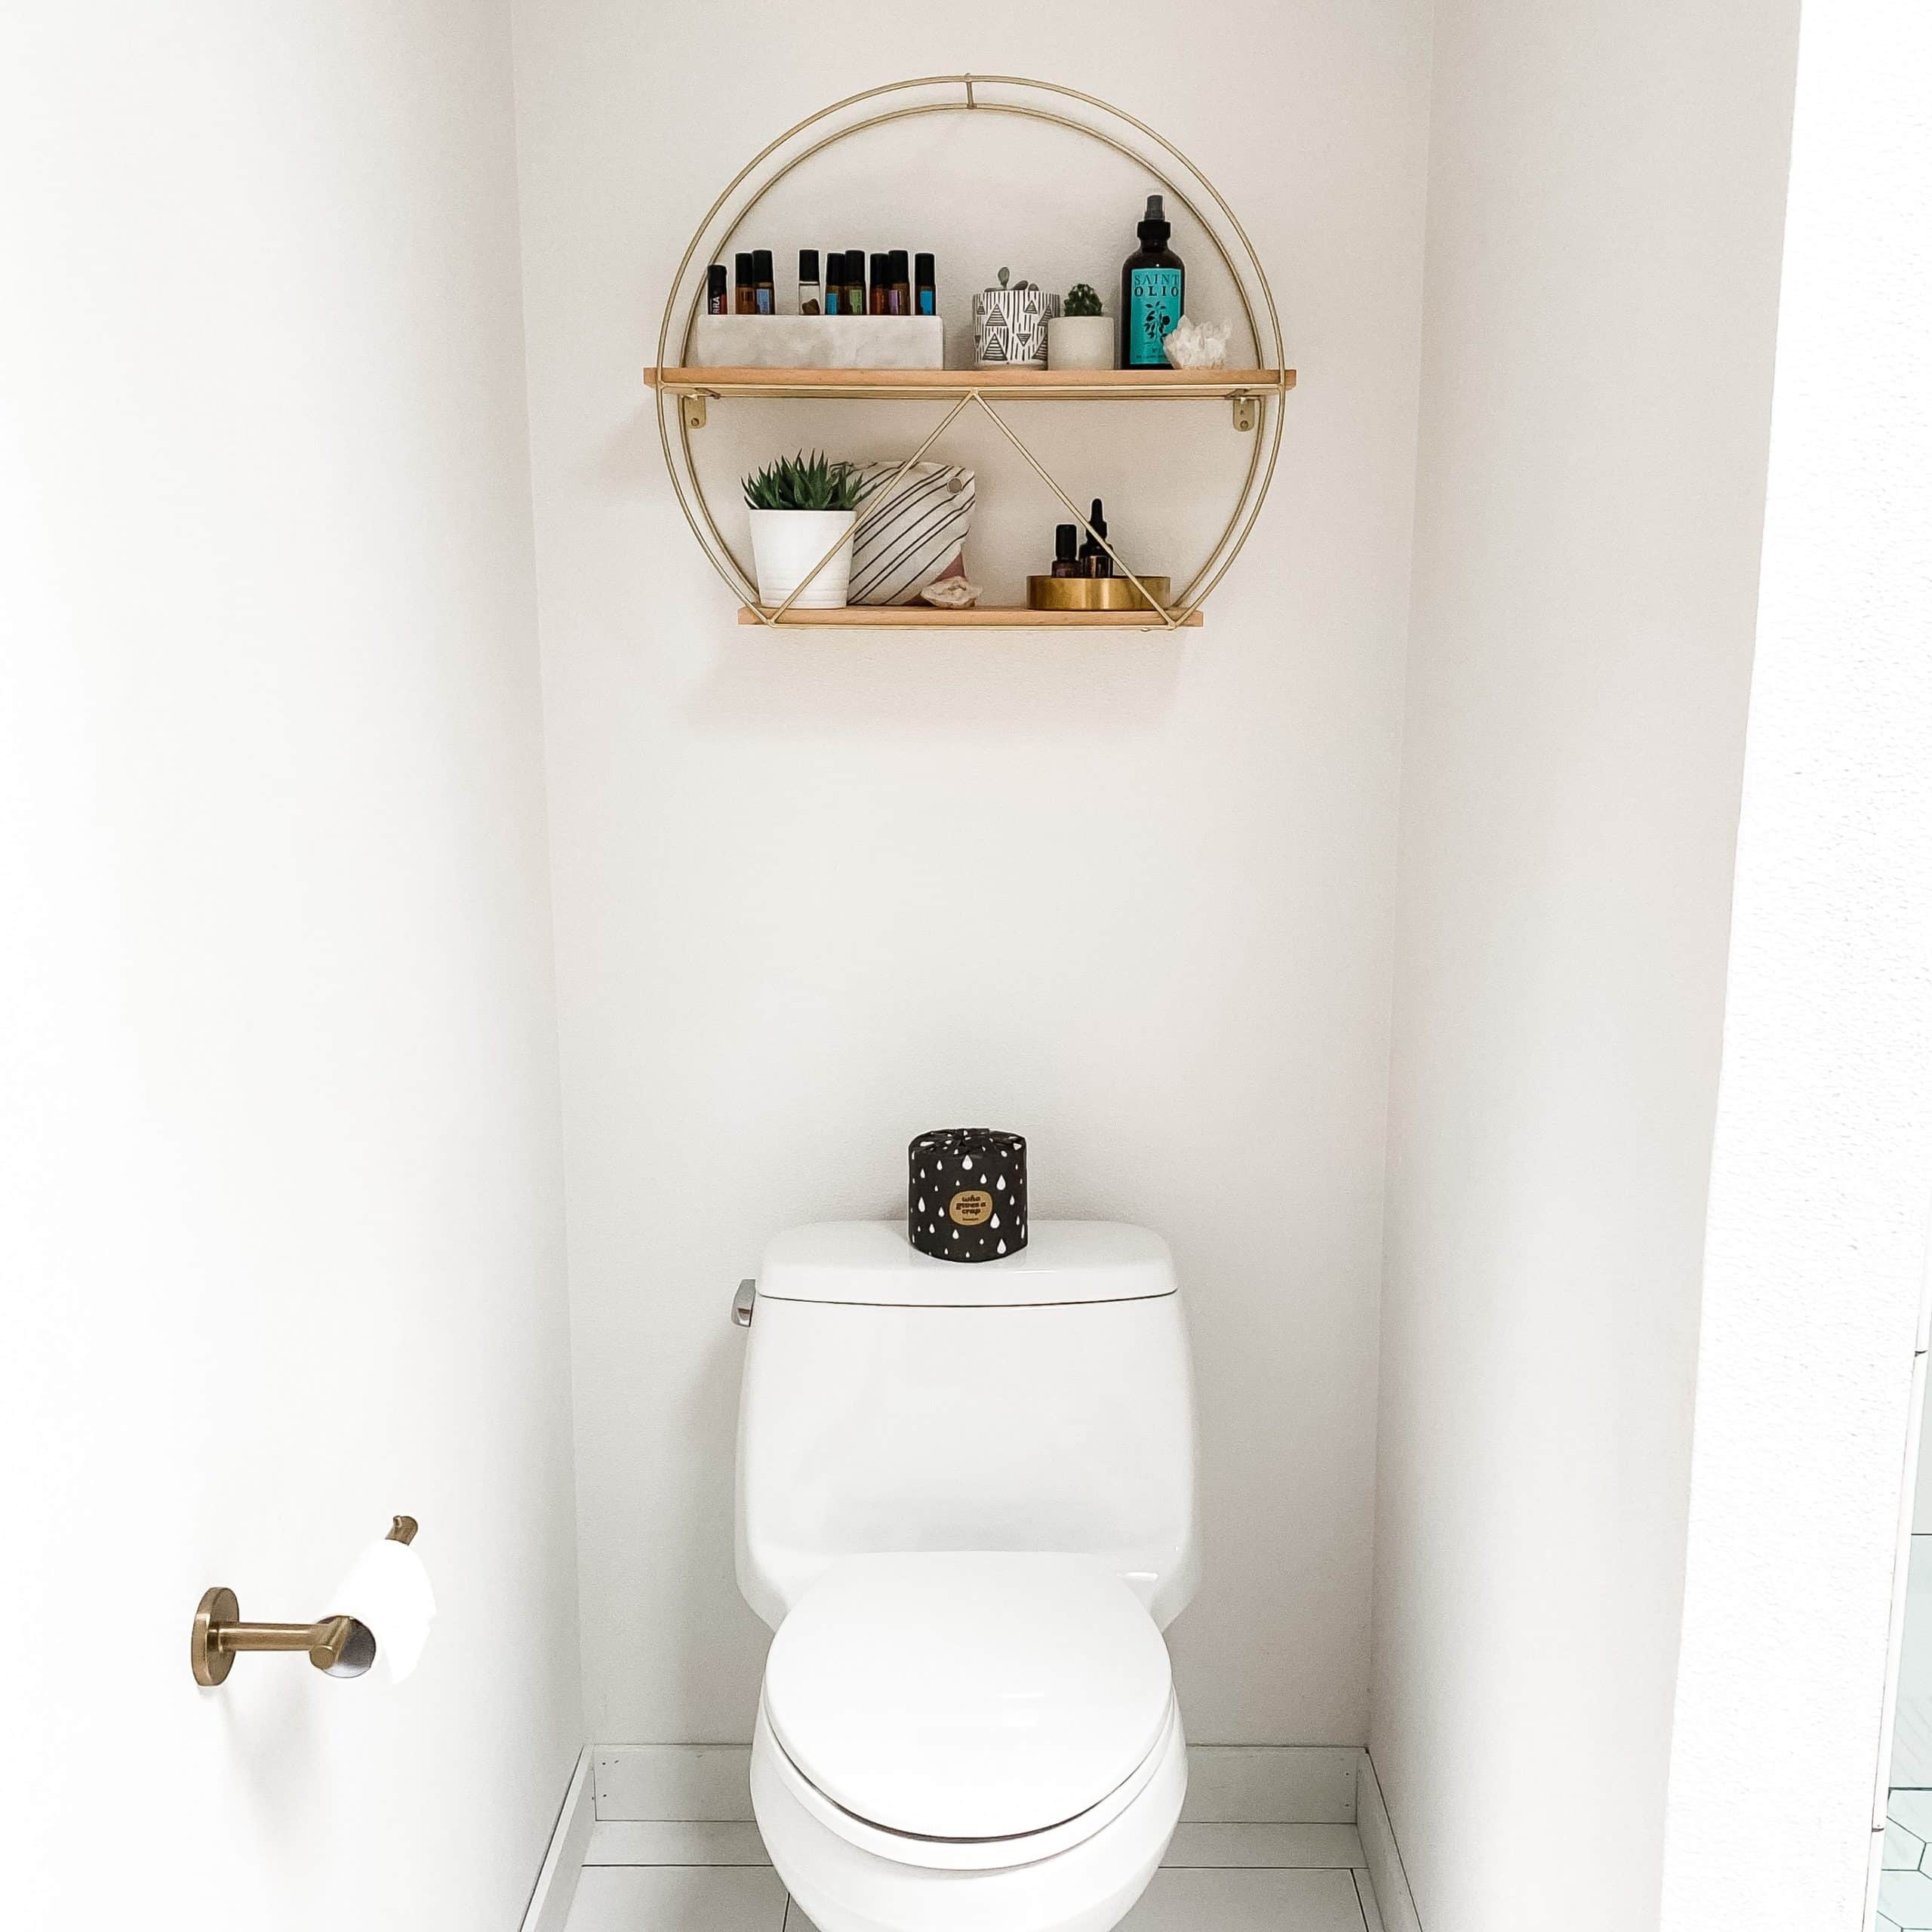 6 Reasons Why Your Toilet Is Leaking at the Base